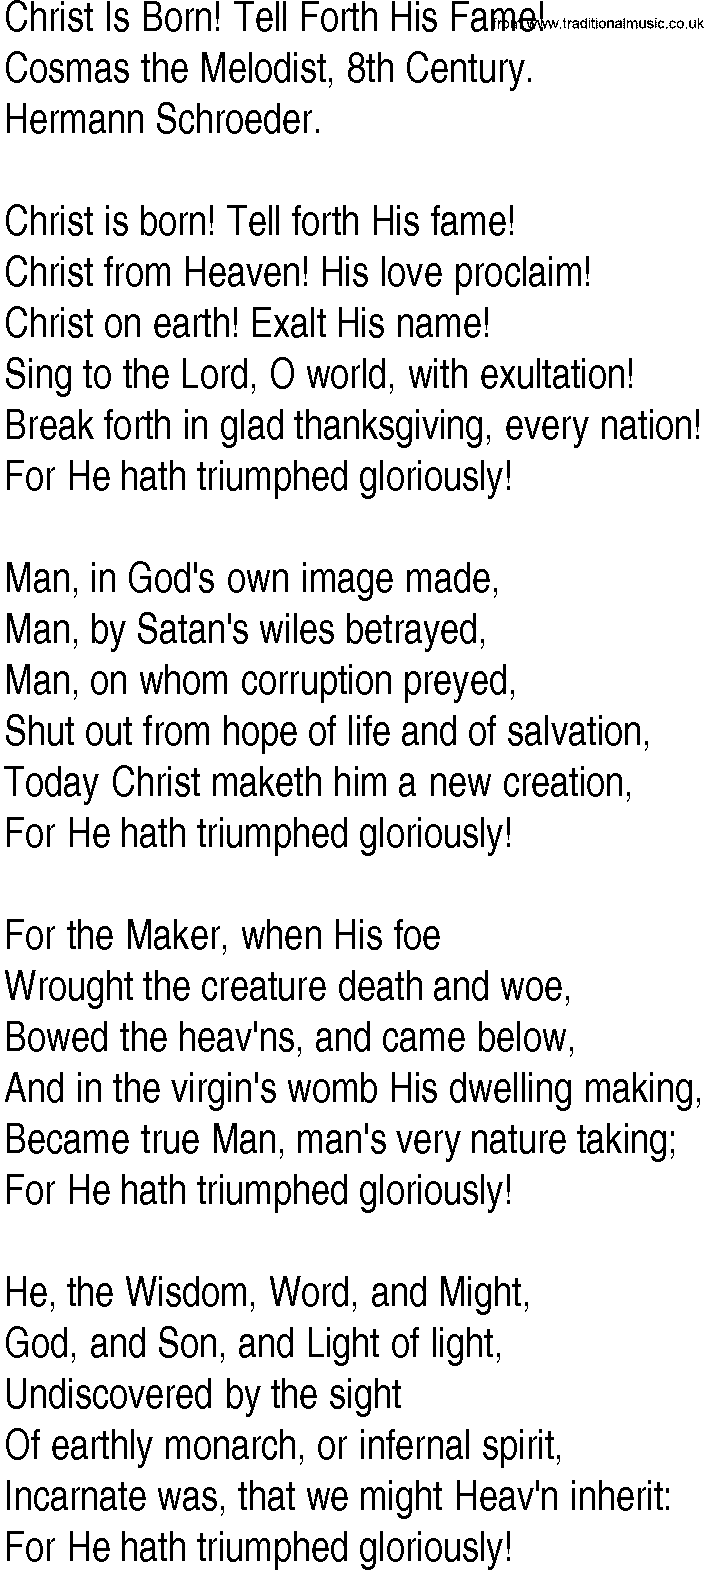 Hymn and Gospel Song: Christ Is Born! Tell Forth His Fame! by Cosmas the Melodist th Century lyrics